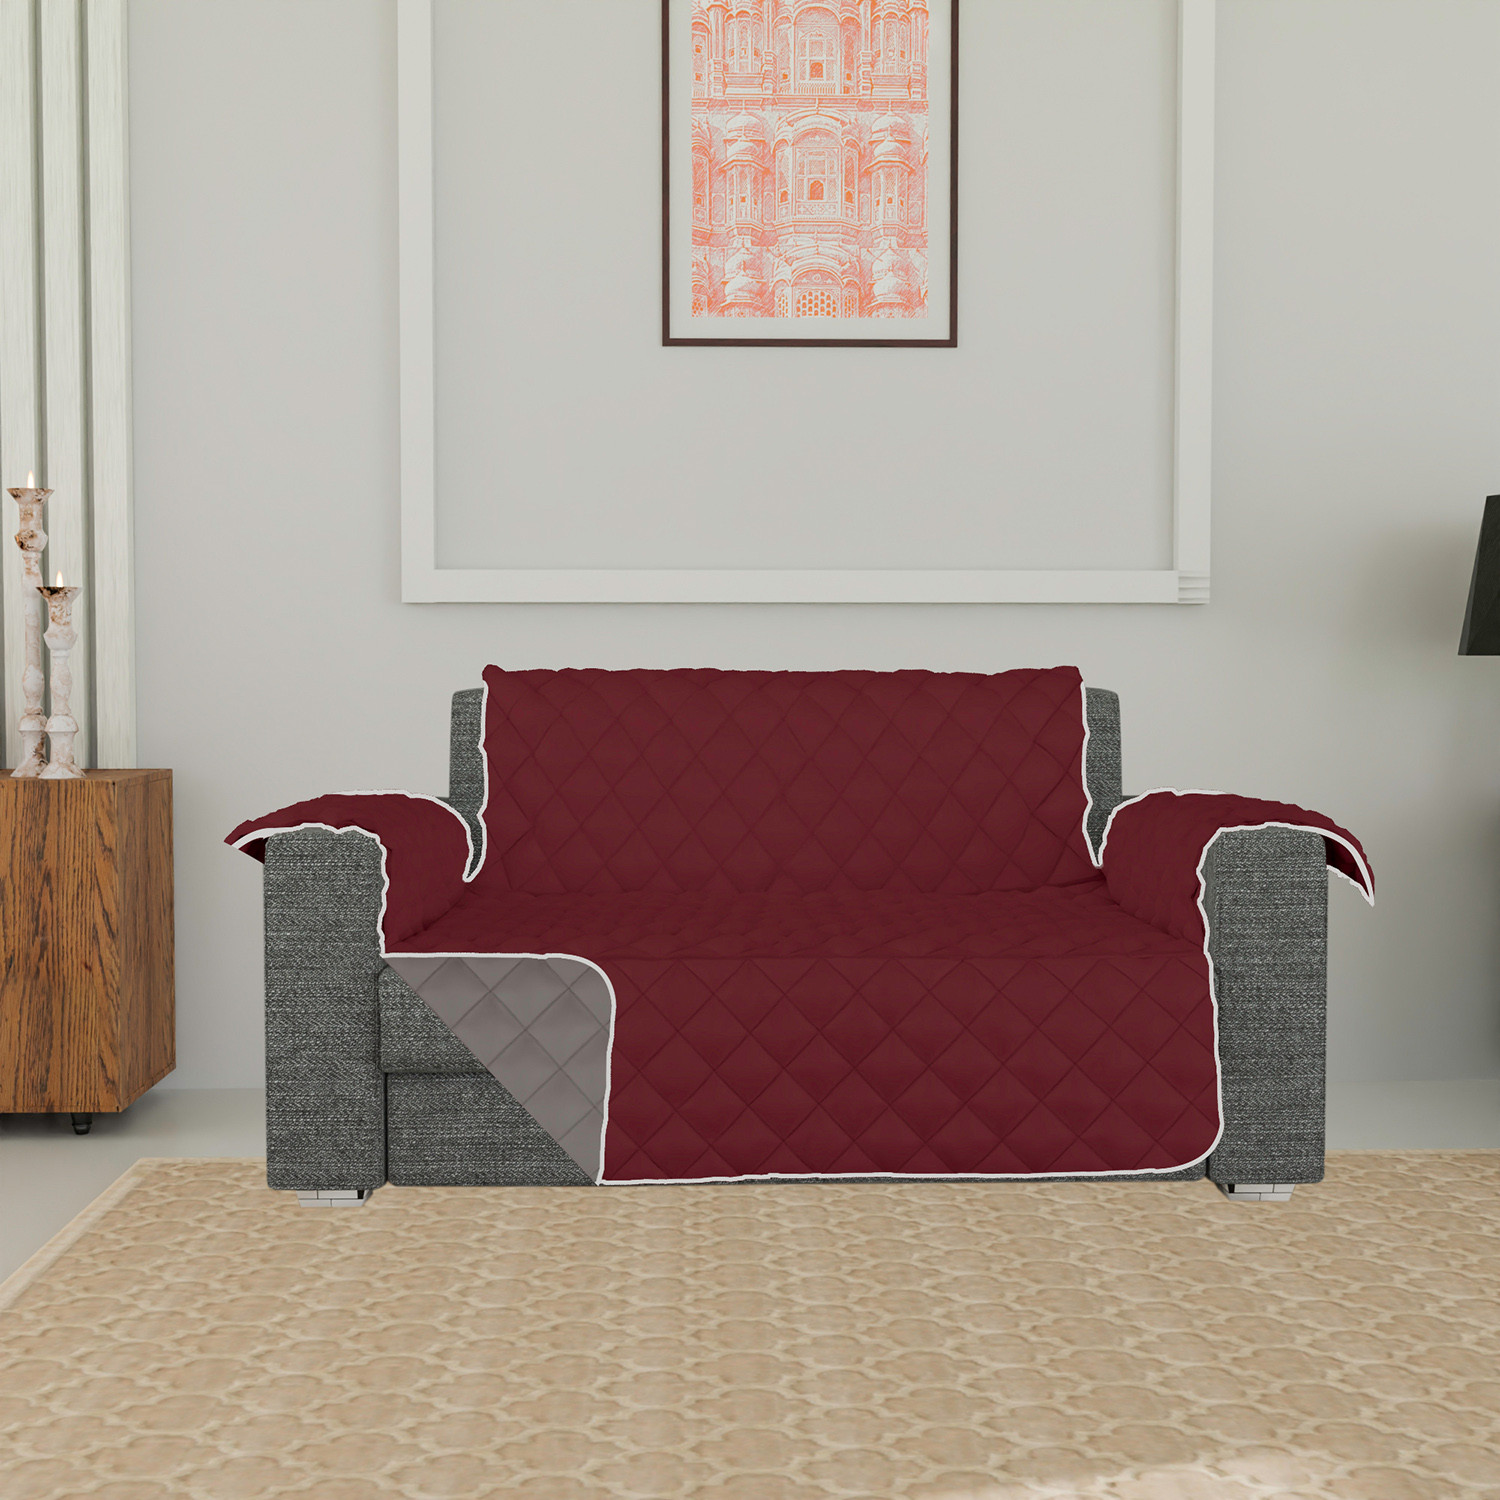 Kuber Industries Both Sided 2 Seater Sofa Cover|Polyester Check Design Couch Cover|Non-Slip Stretchy Sofa Slipcovers (Maroon & Gray)